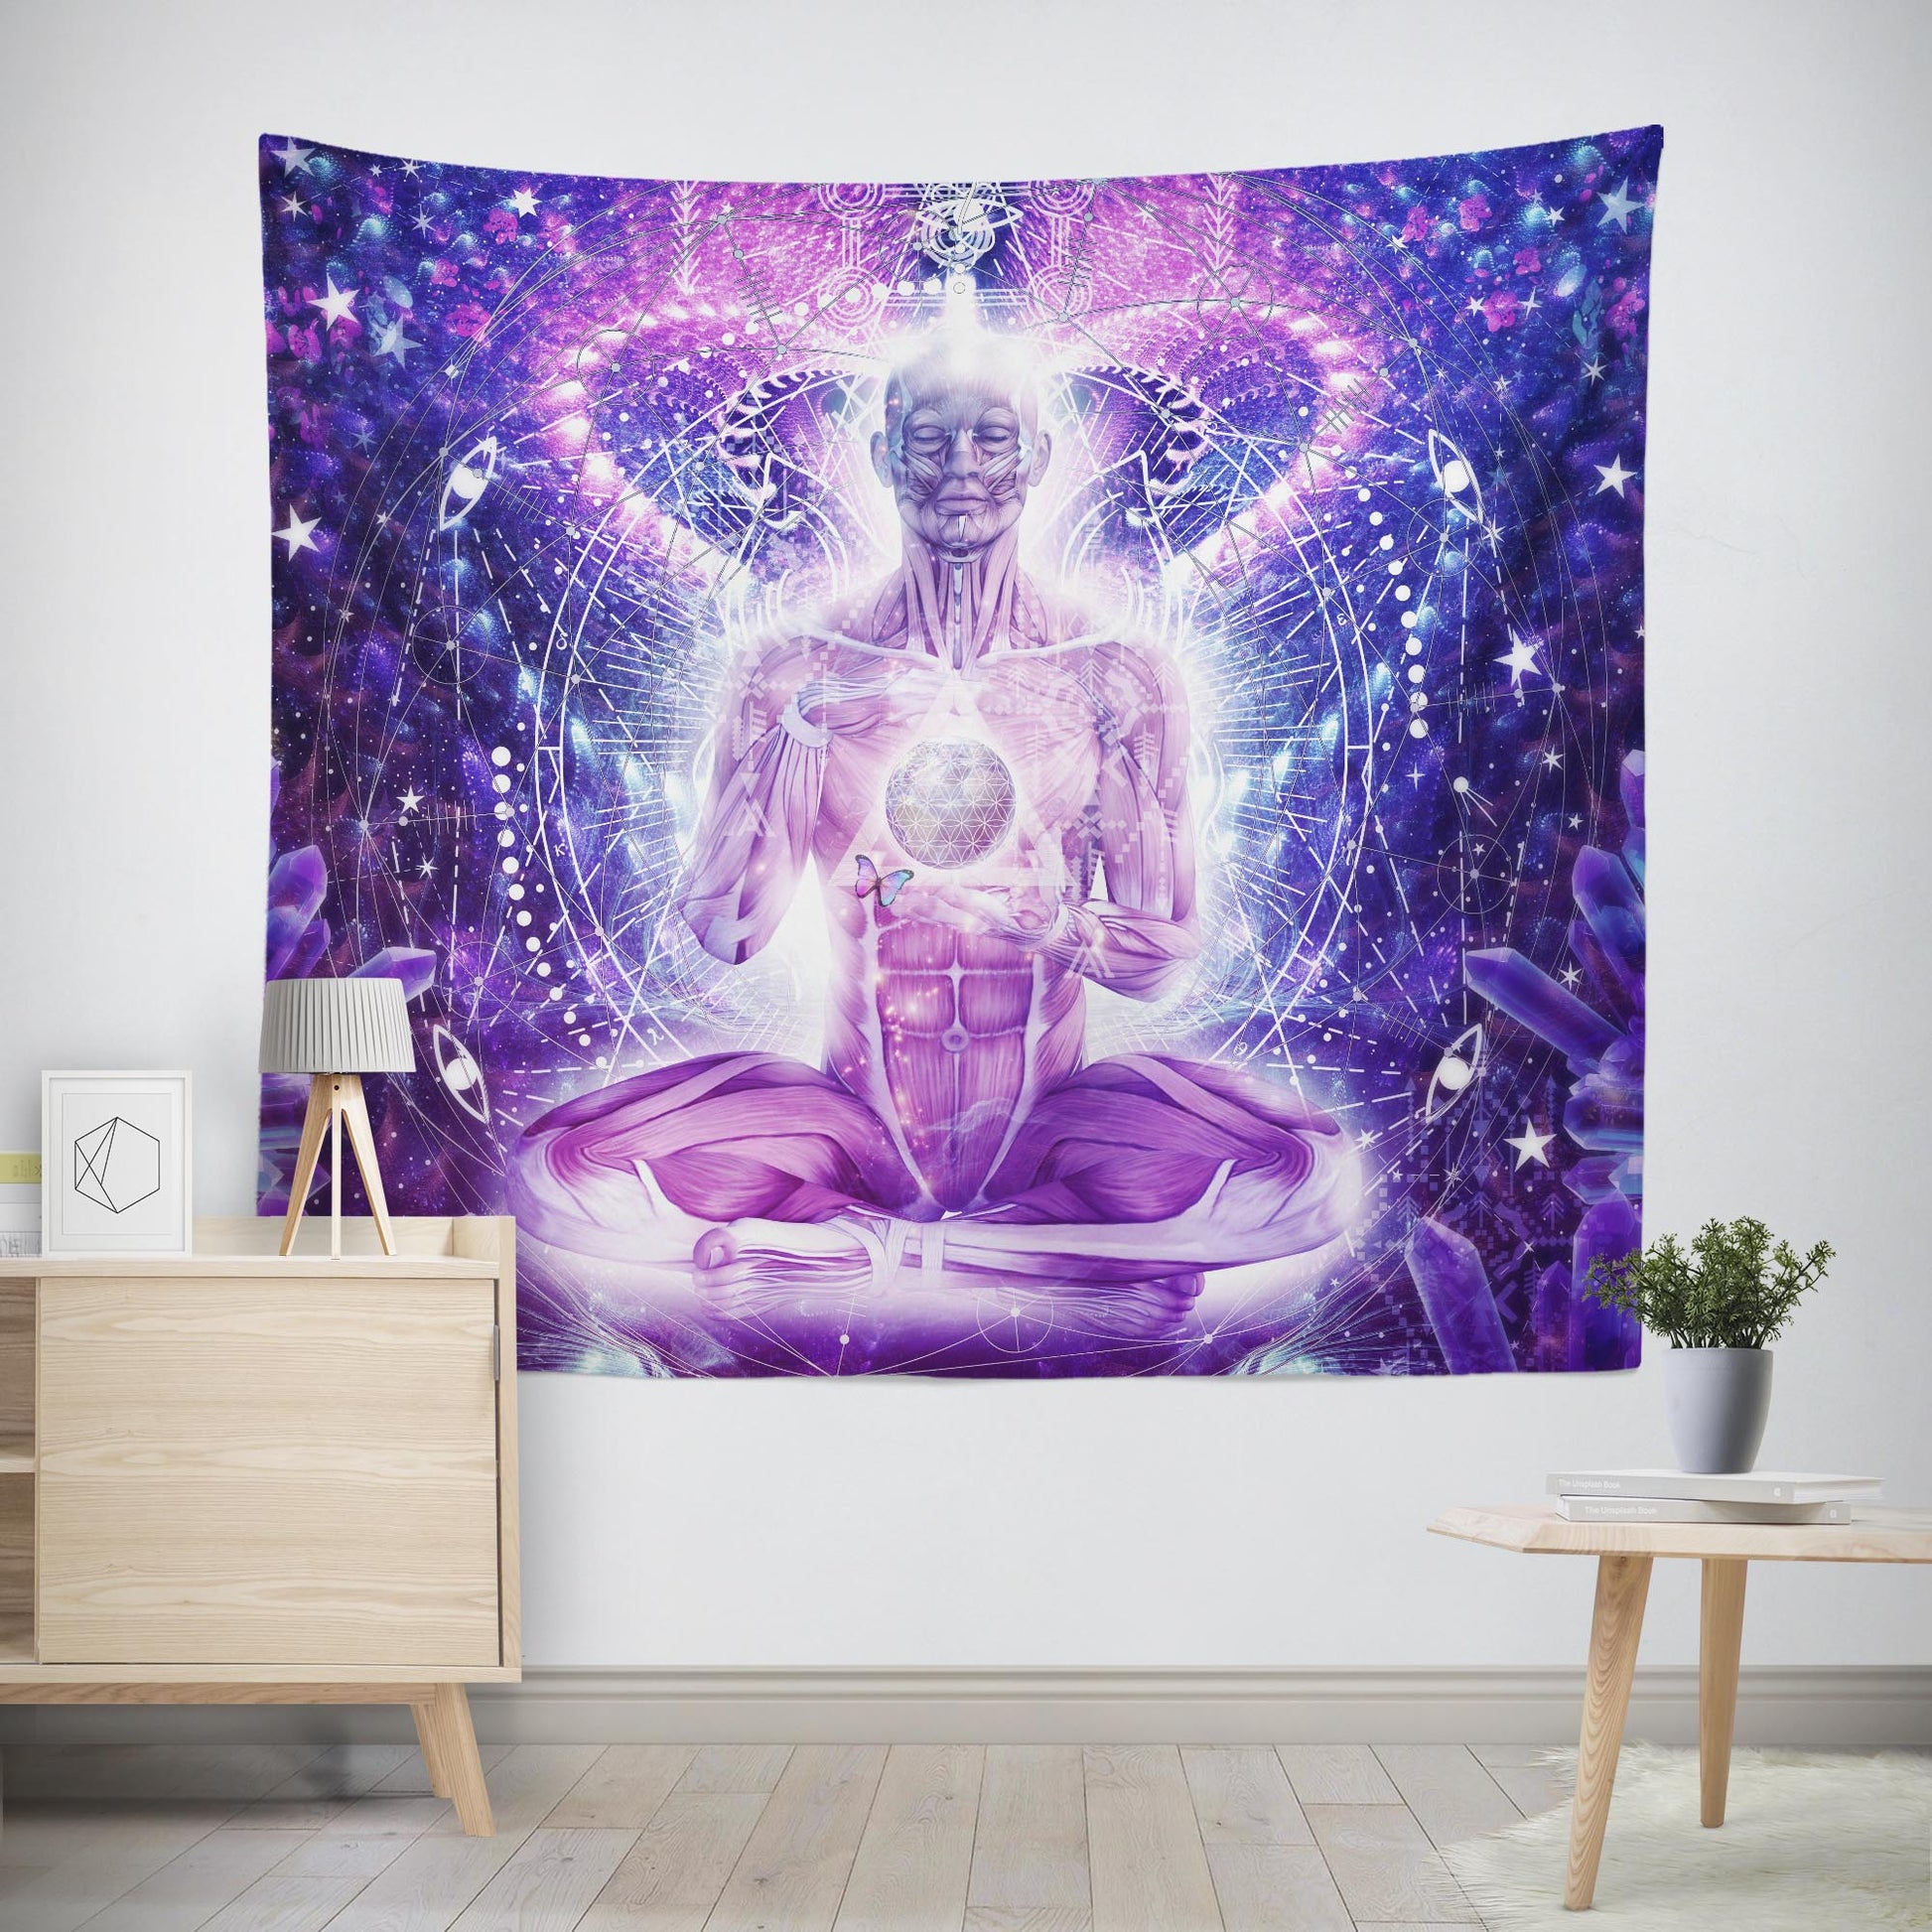 Large wall tapestry of spiritual meditating person in space